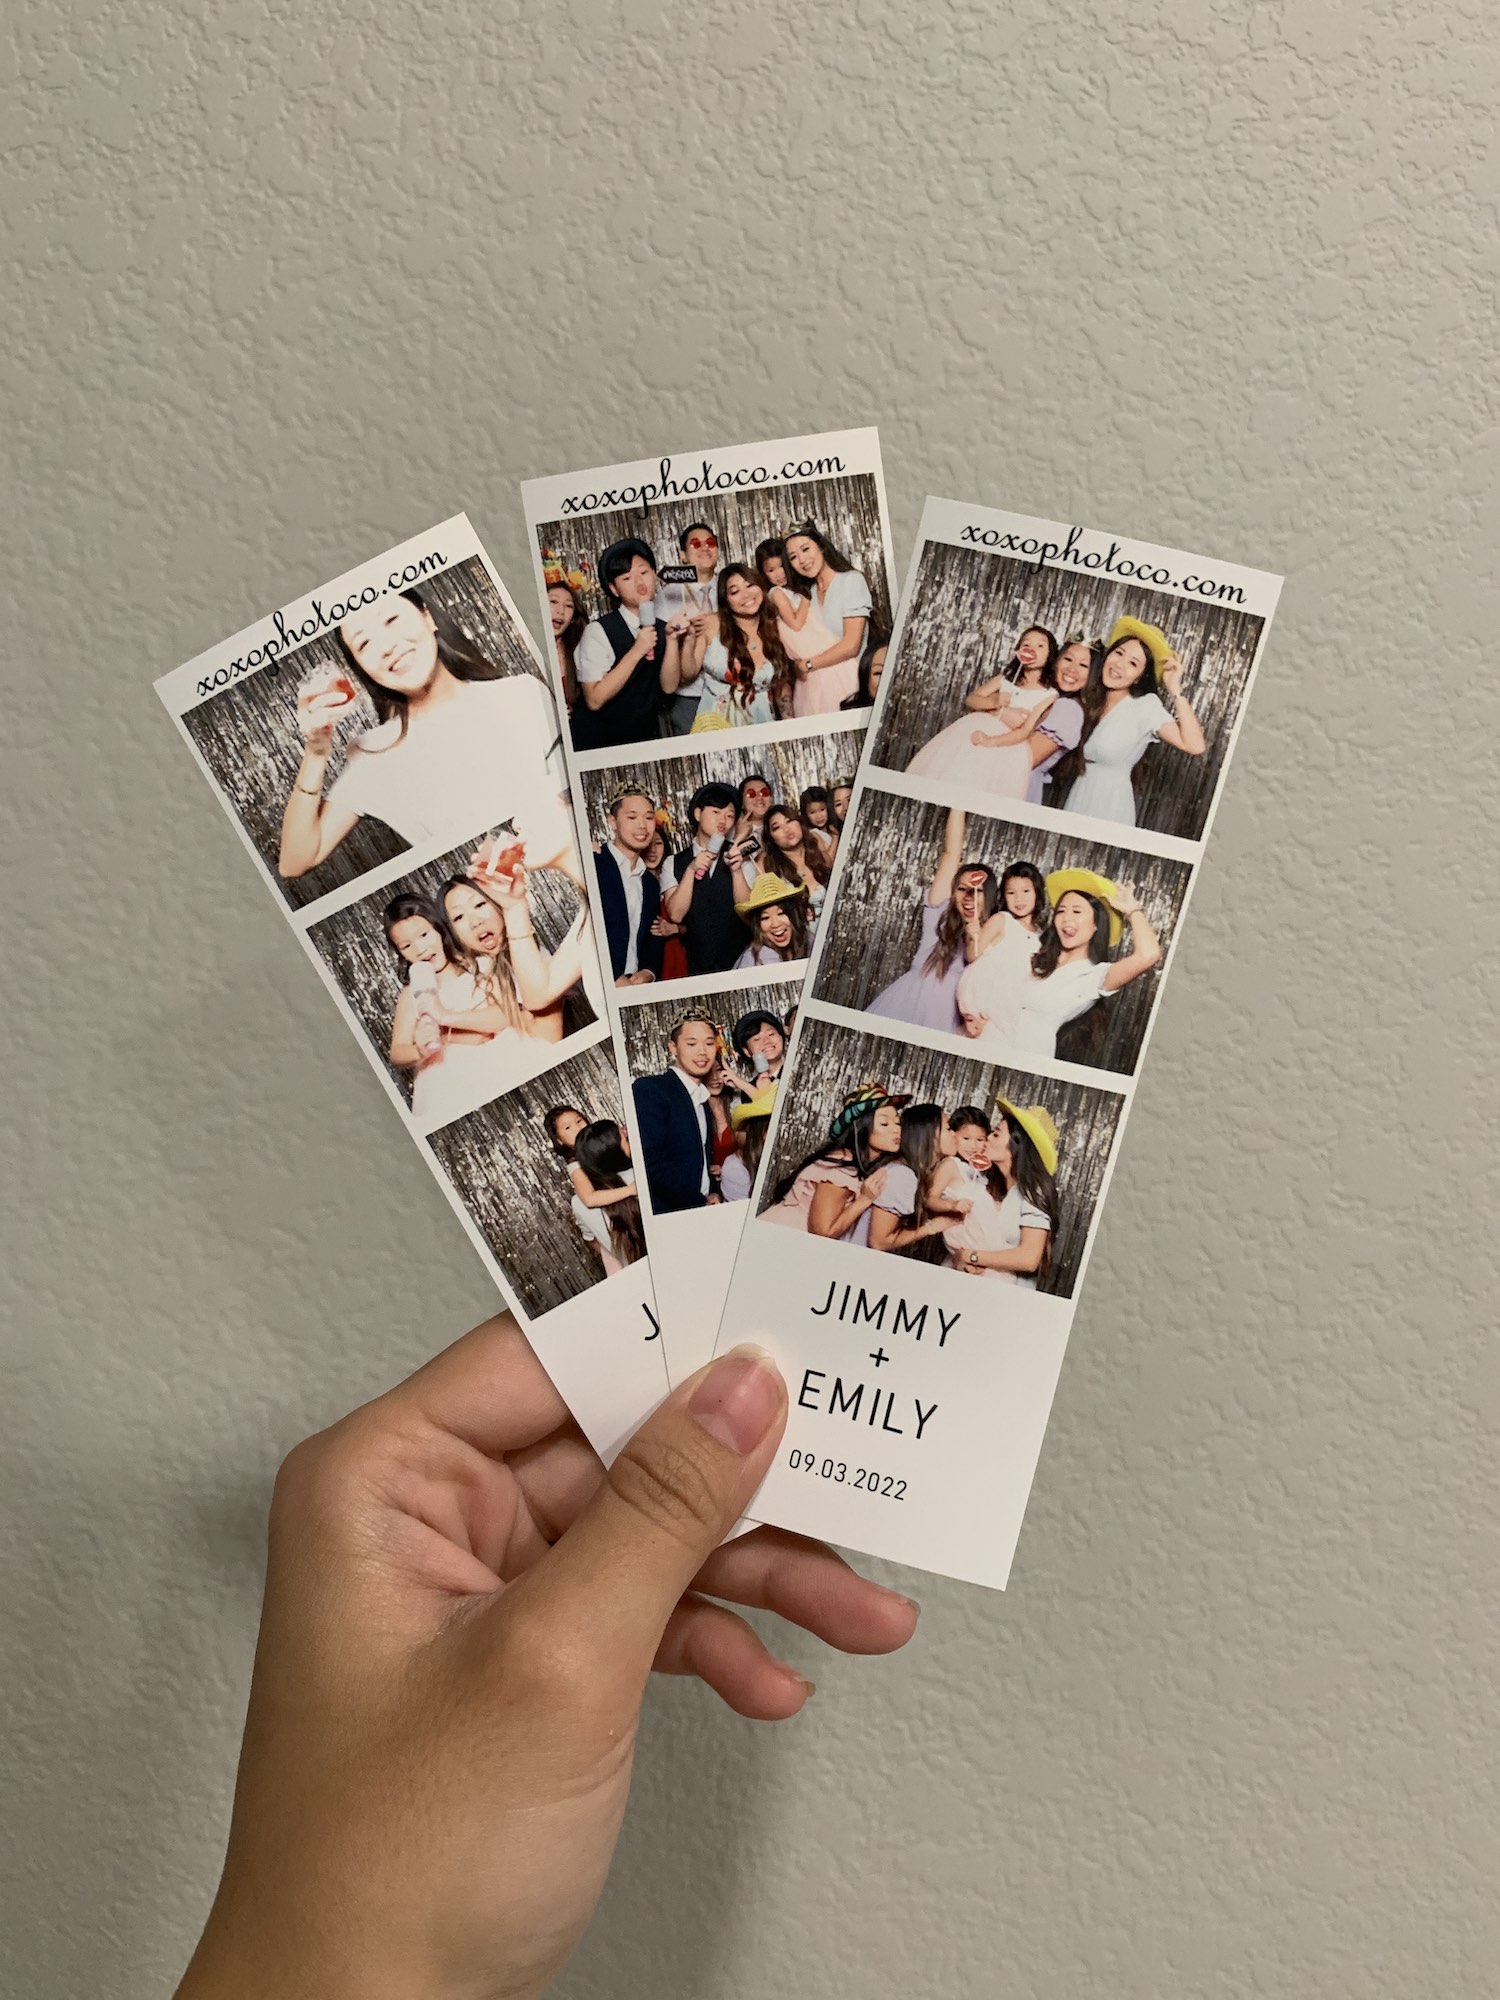 Lifestyle blogger Demi Bang shares about her trip to Salt Lake City, Utah to celebrate her cousin's wedding.